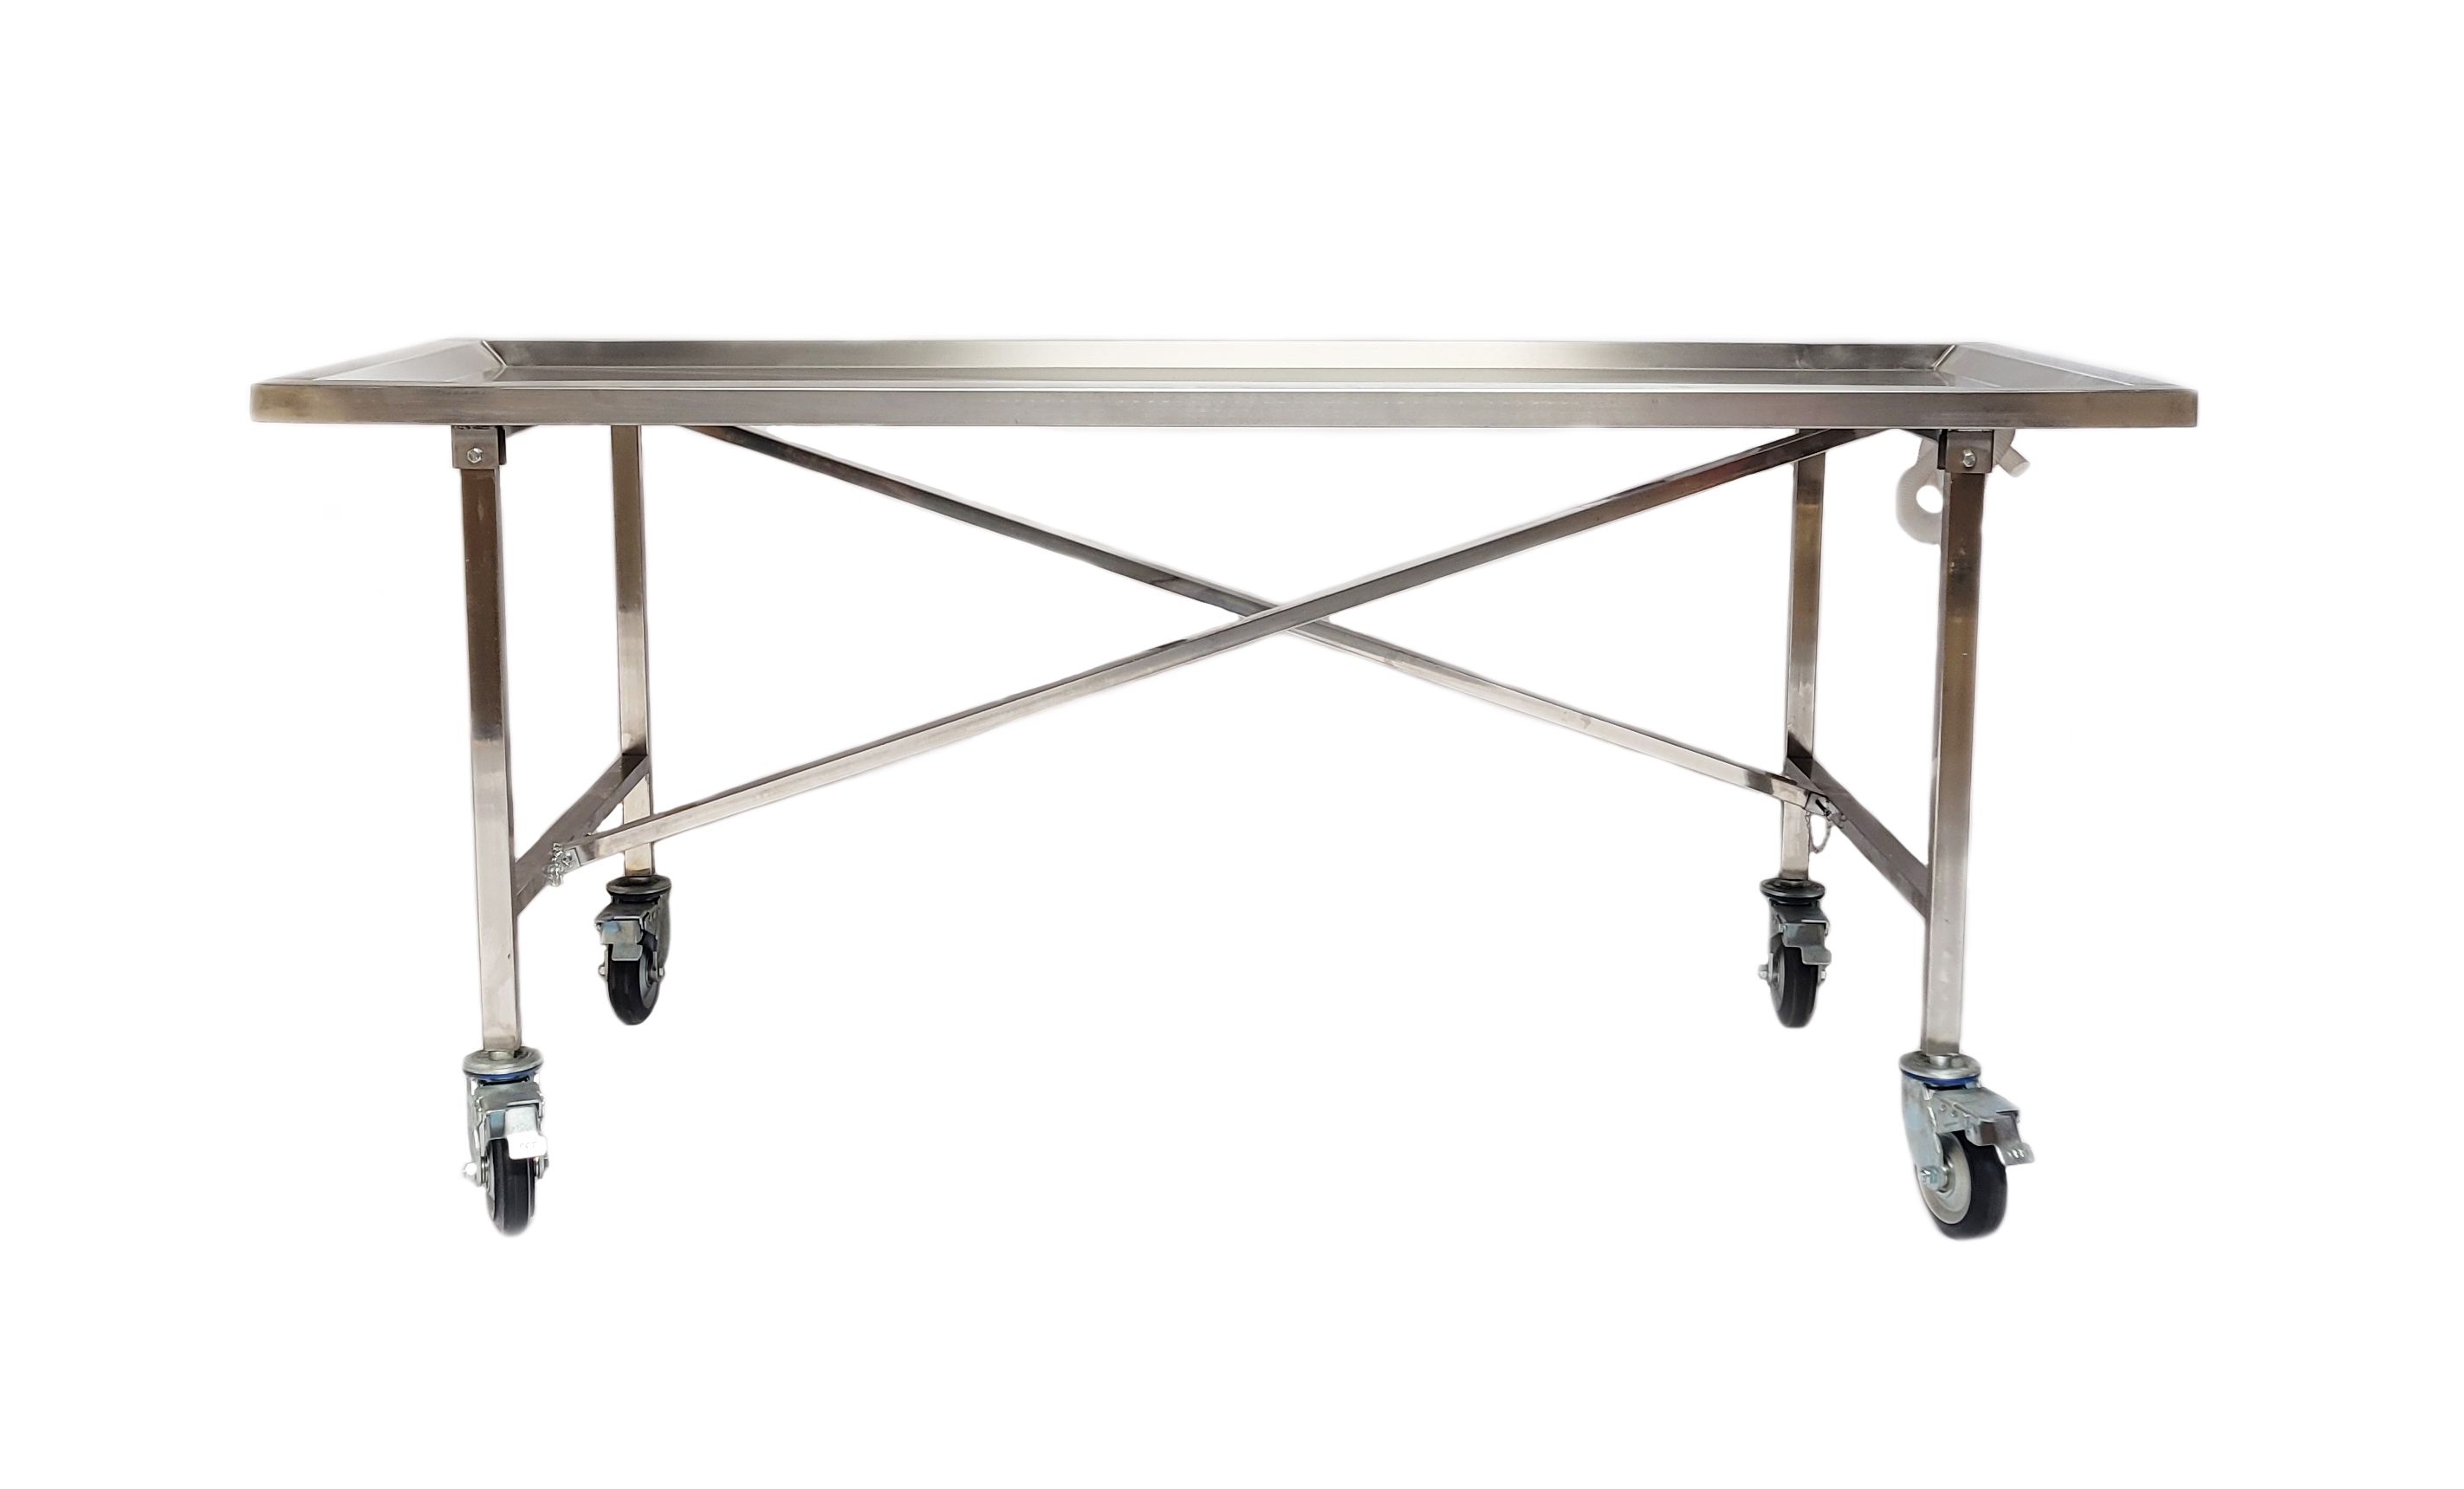 Autopsy Embalming Trolley with Folding Legs